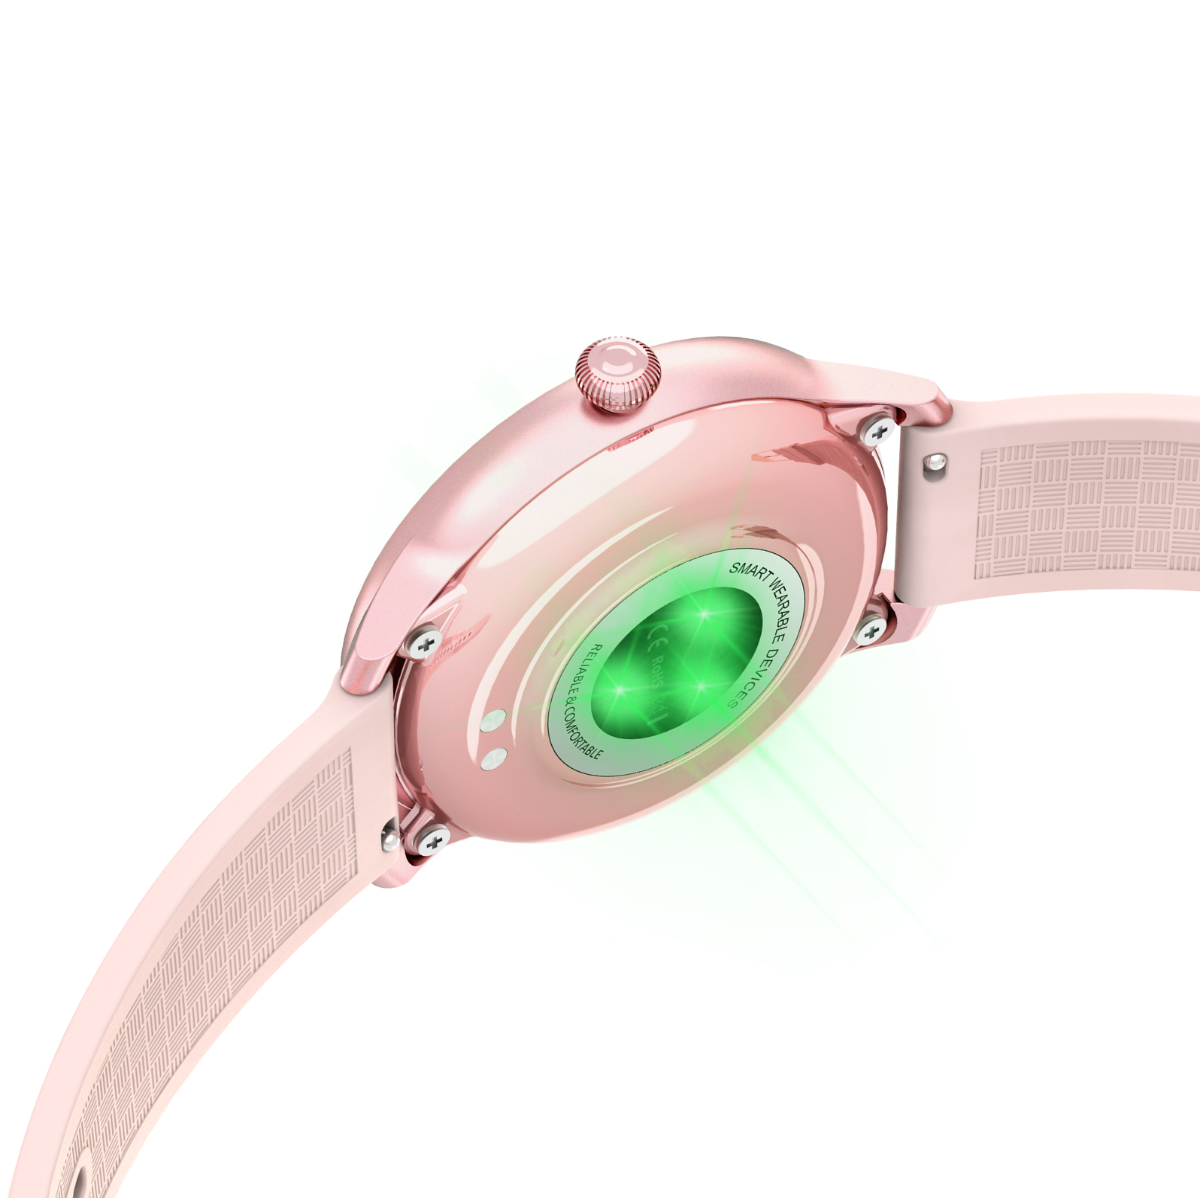 https://outtec.com.ar/wp-content/uploads/2021/08/IMISW11L-XIAOMI-MI-IMILAB-WATCH-W11-MUJER-1.png